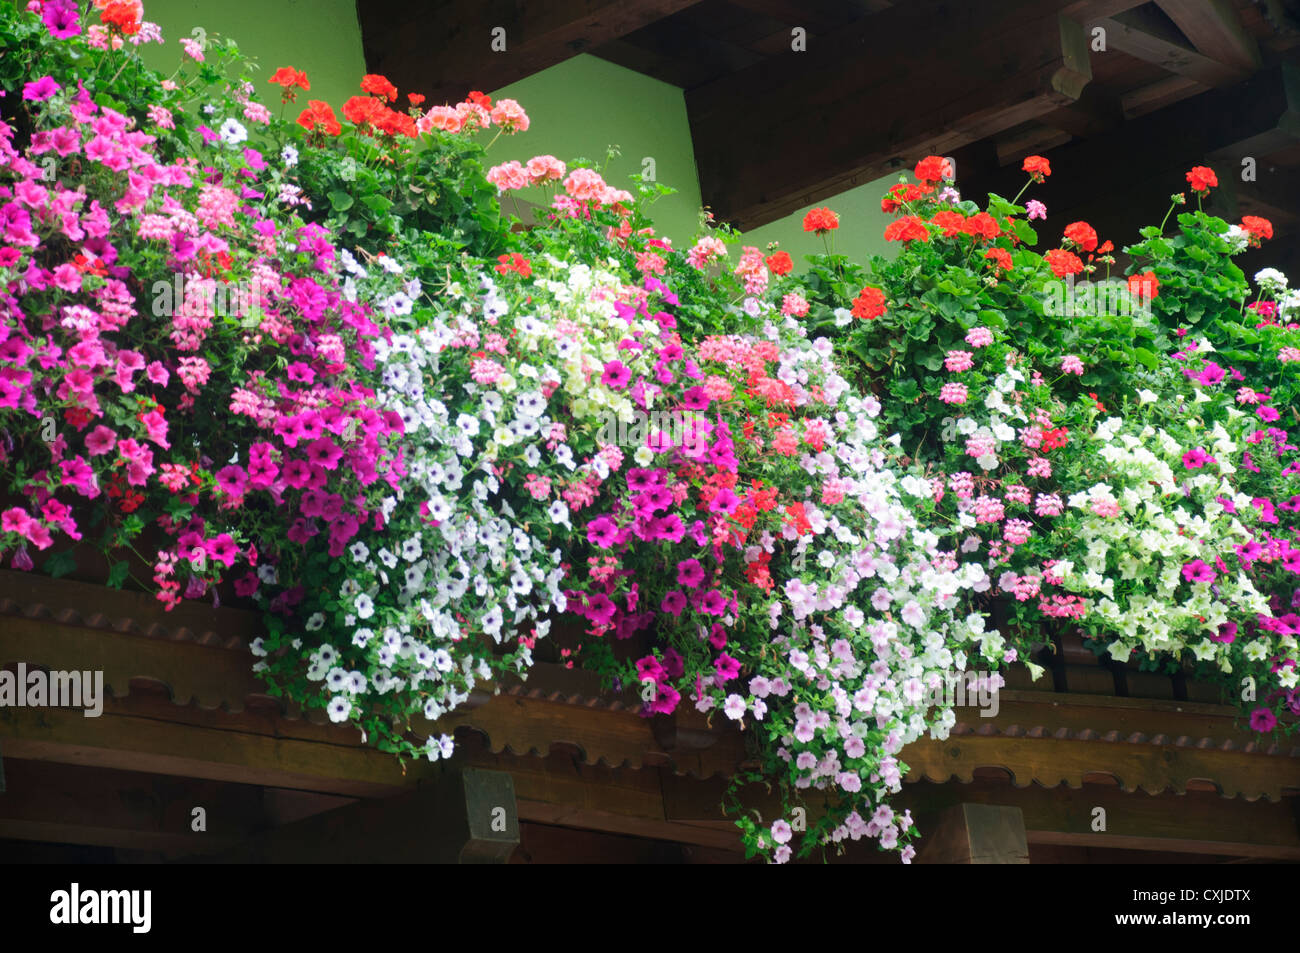 Austria, Tyrol, flowers blooming on a balcony  Stock Photo